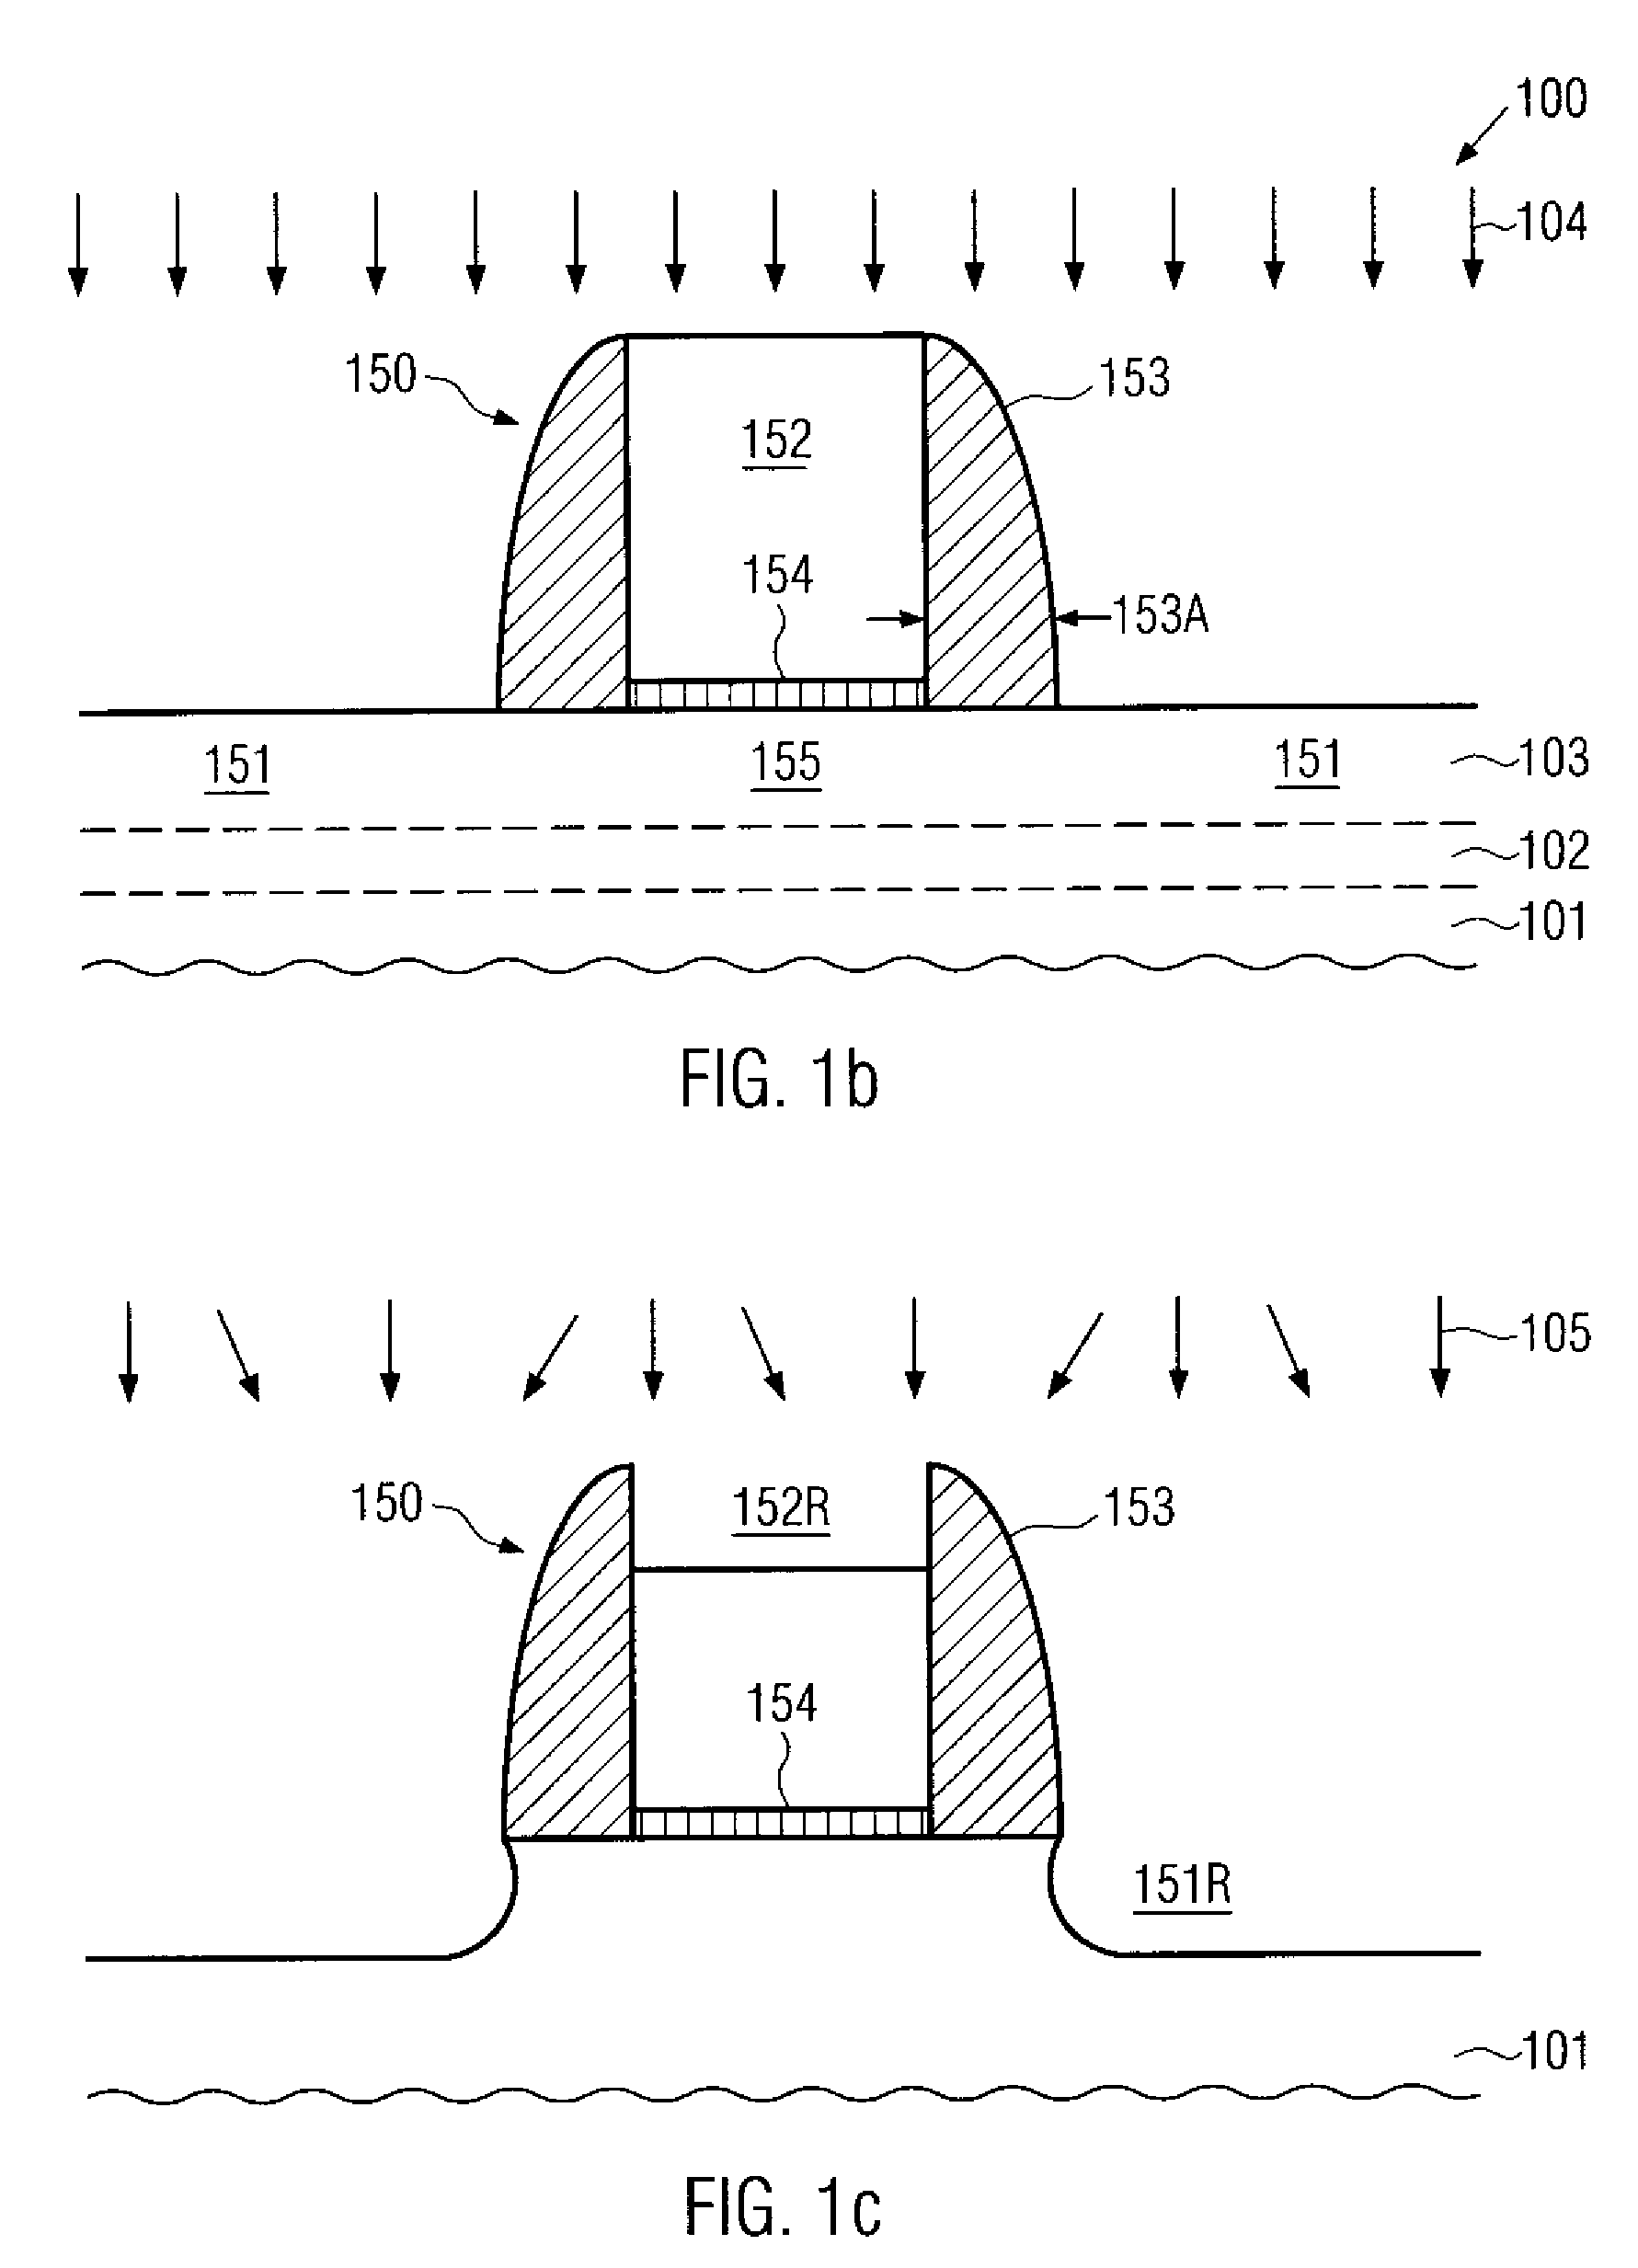 Transistor having a channel with biaxial strain induced by silicon/germanium in the gate electrode